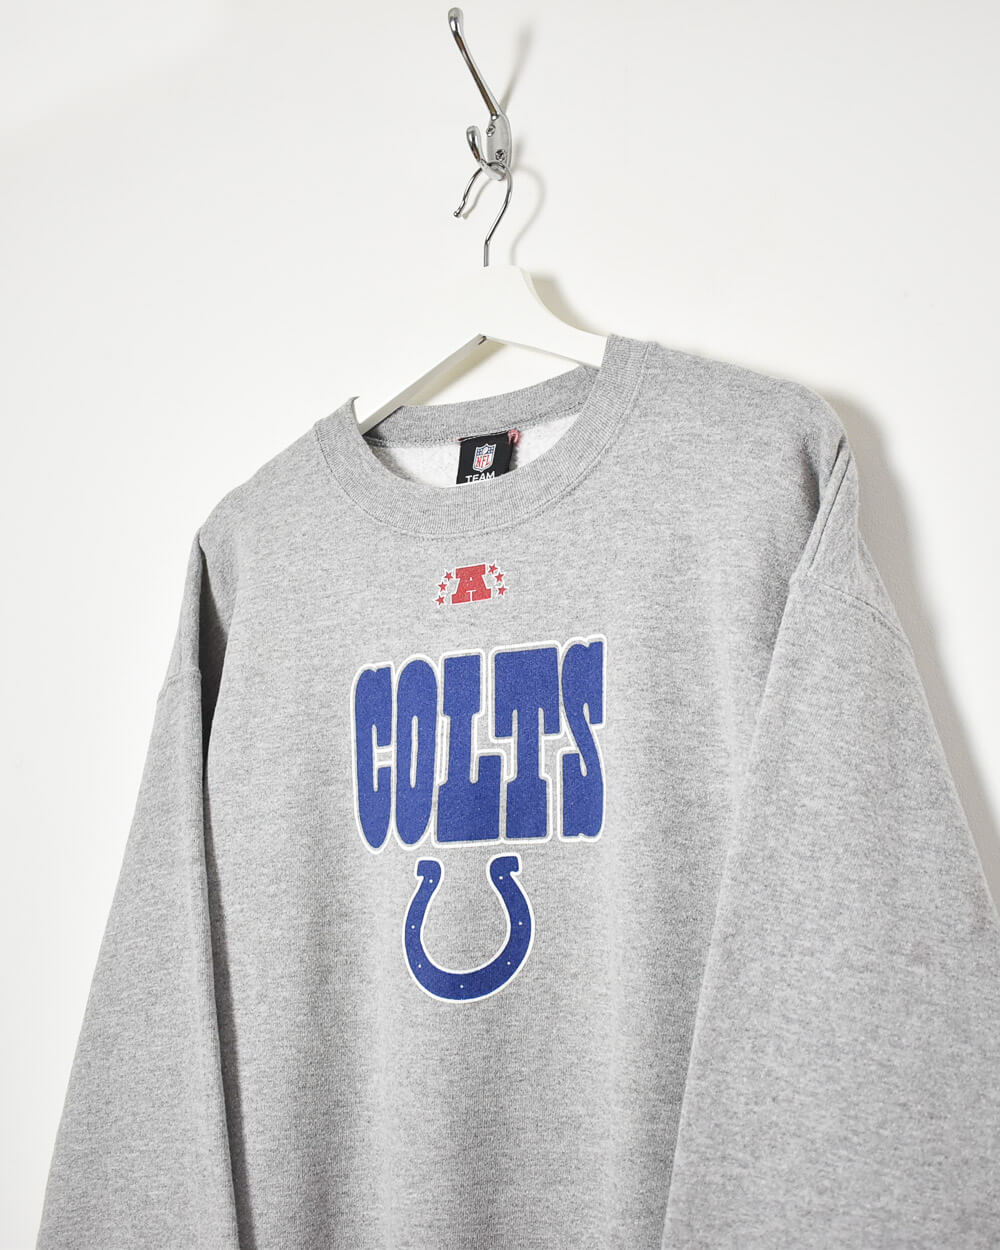 NFL Team Colts Sweatshirt - Large - Domno Vintage 90s, 80s, 00s Retro and Vintage Clothing 